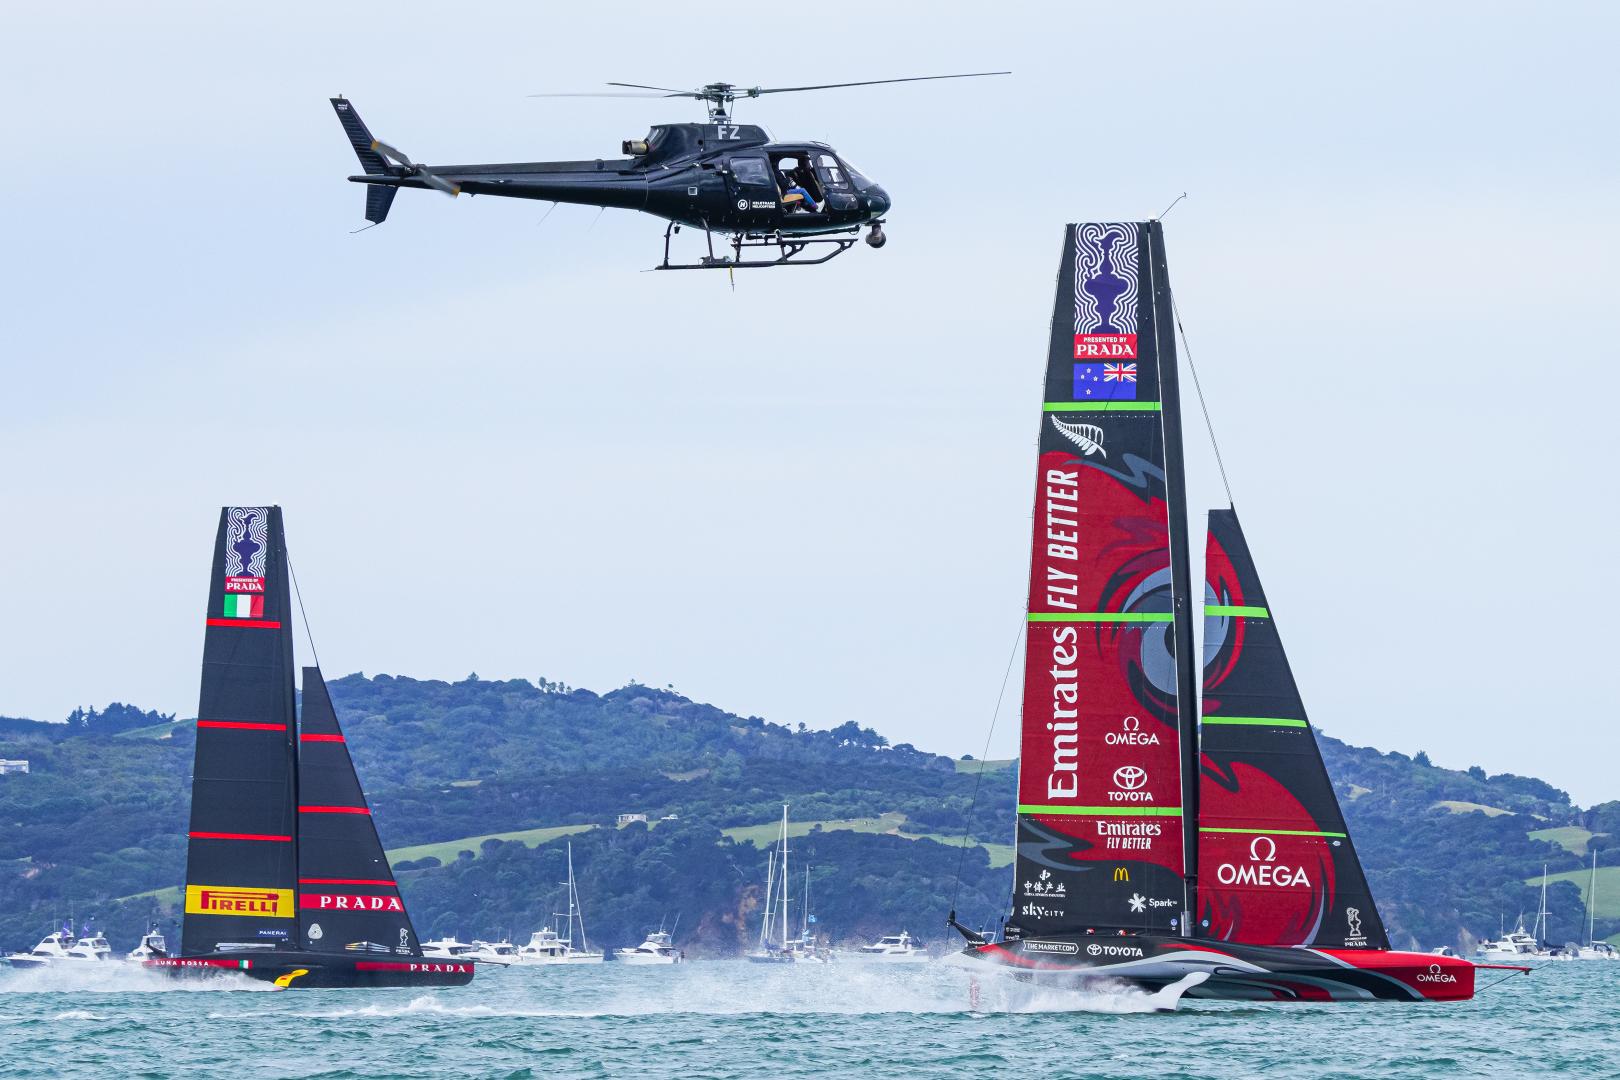 The first day of the 36 America's Cup - the opening battles